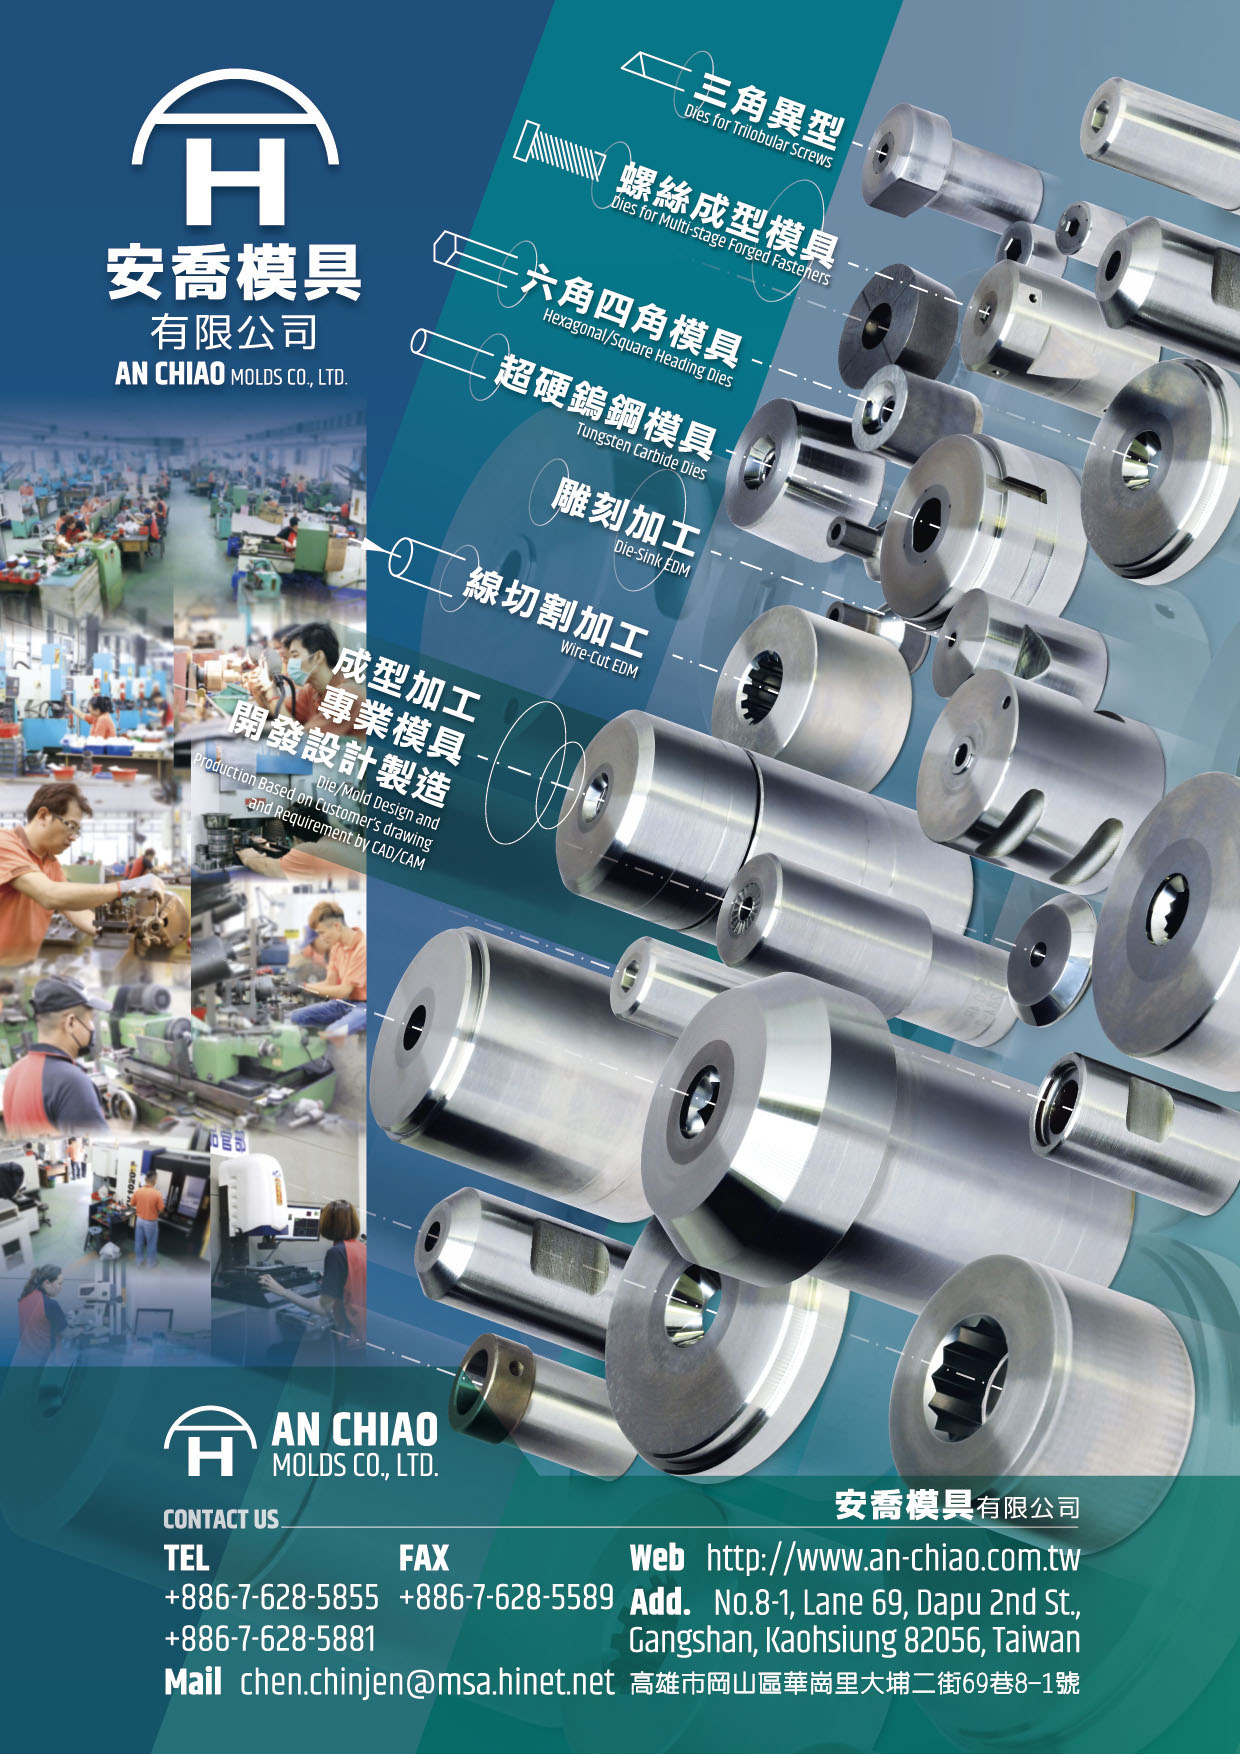 AN CHIAO MOLDS CO., LTD. , Dies for Trilobular Screws, Dies for Multi-stage Forged Fasteners, Hexagonal / Square Heading Dies, Tungsten Carbide Dies, Die-Sink EDM, Wire-Cut EDM, Die / Mold Design and Production Based on Customer's drawing and Requirement by CAD/CAM , Trimming Dies